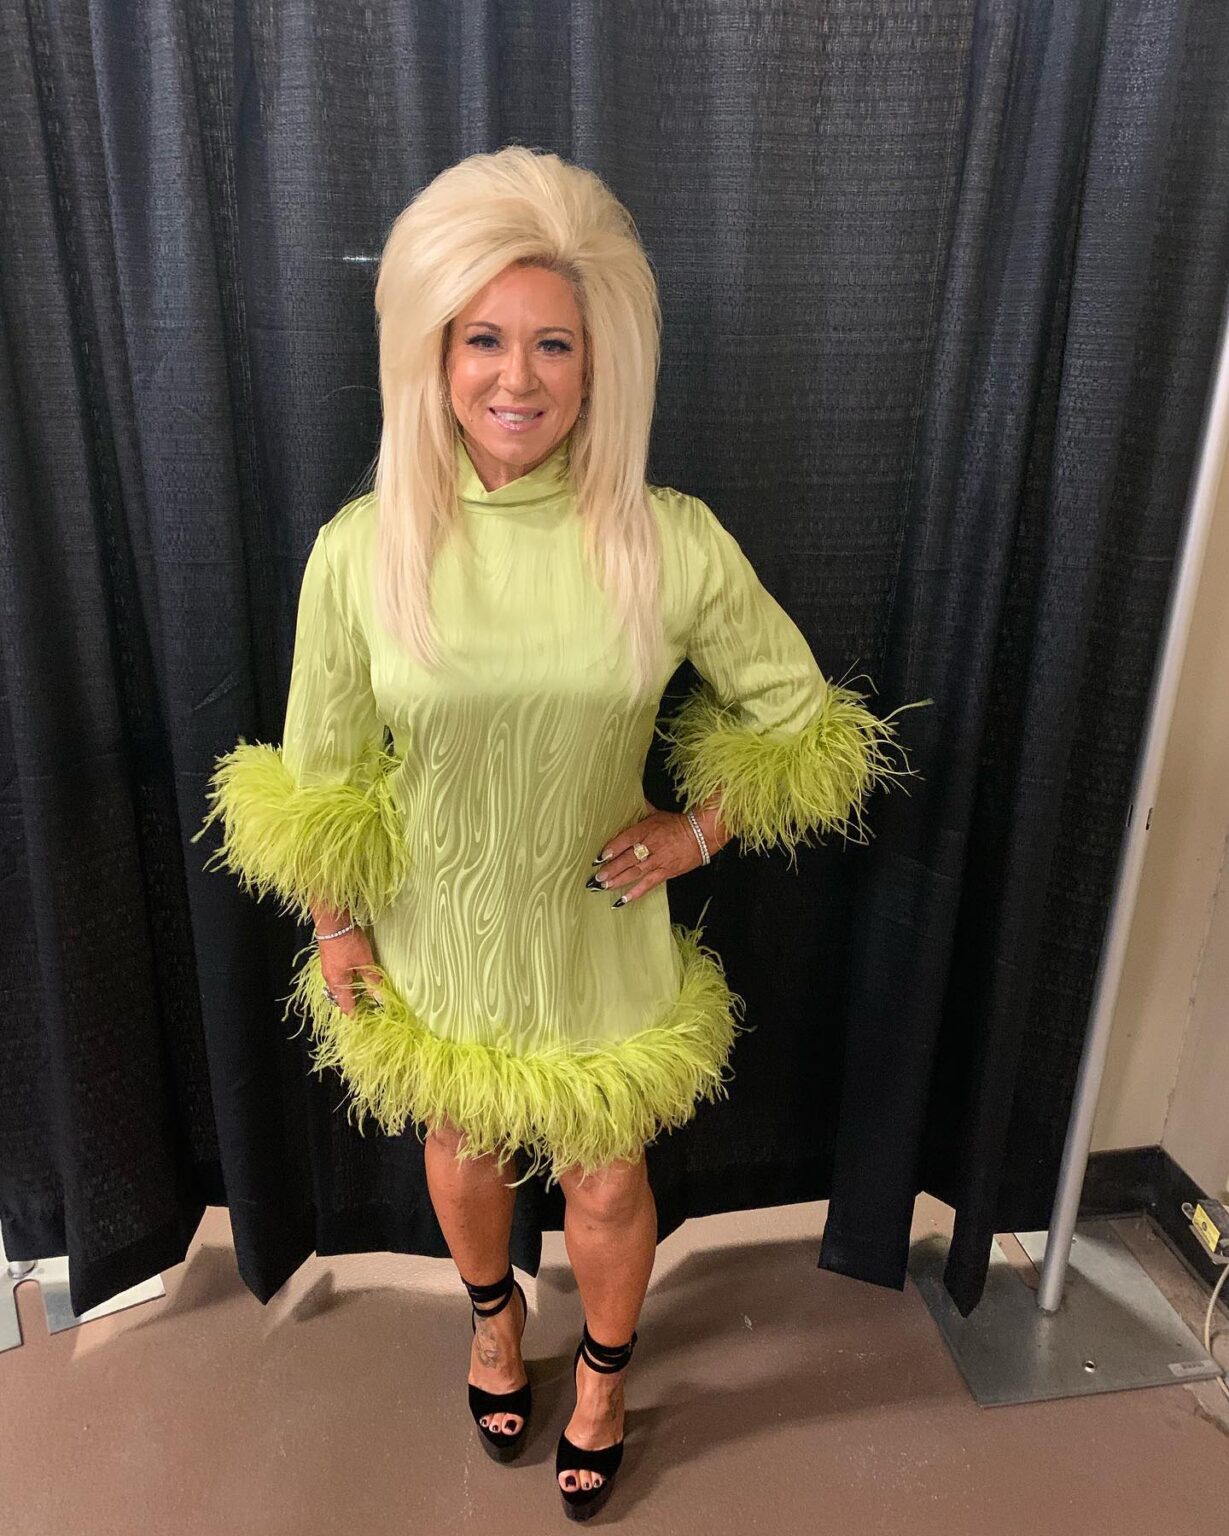 Long Island Medium Theresa Caputo Shows Off Her Toned And Tan Legs As She Poses In A Rare Photo 